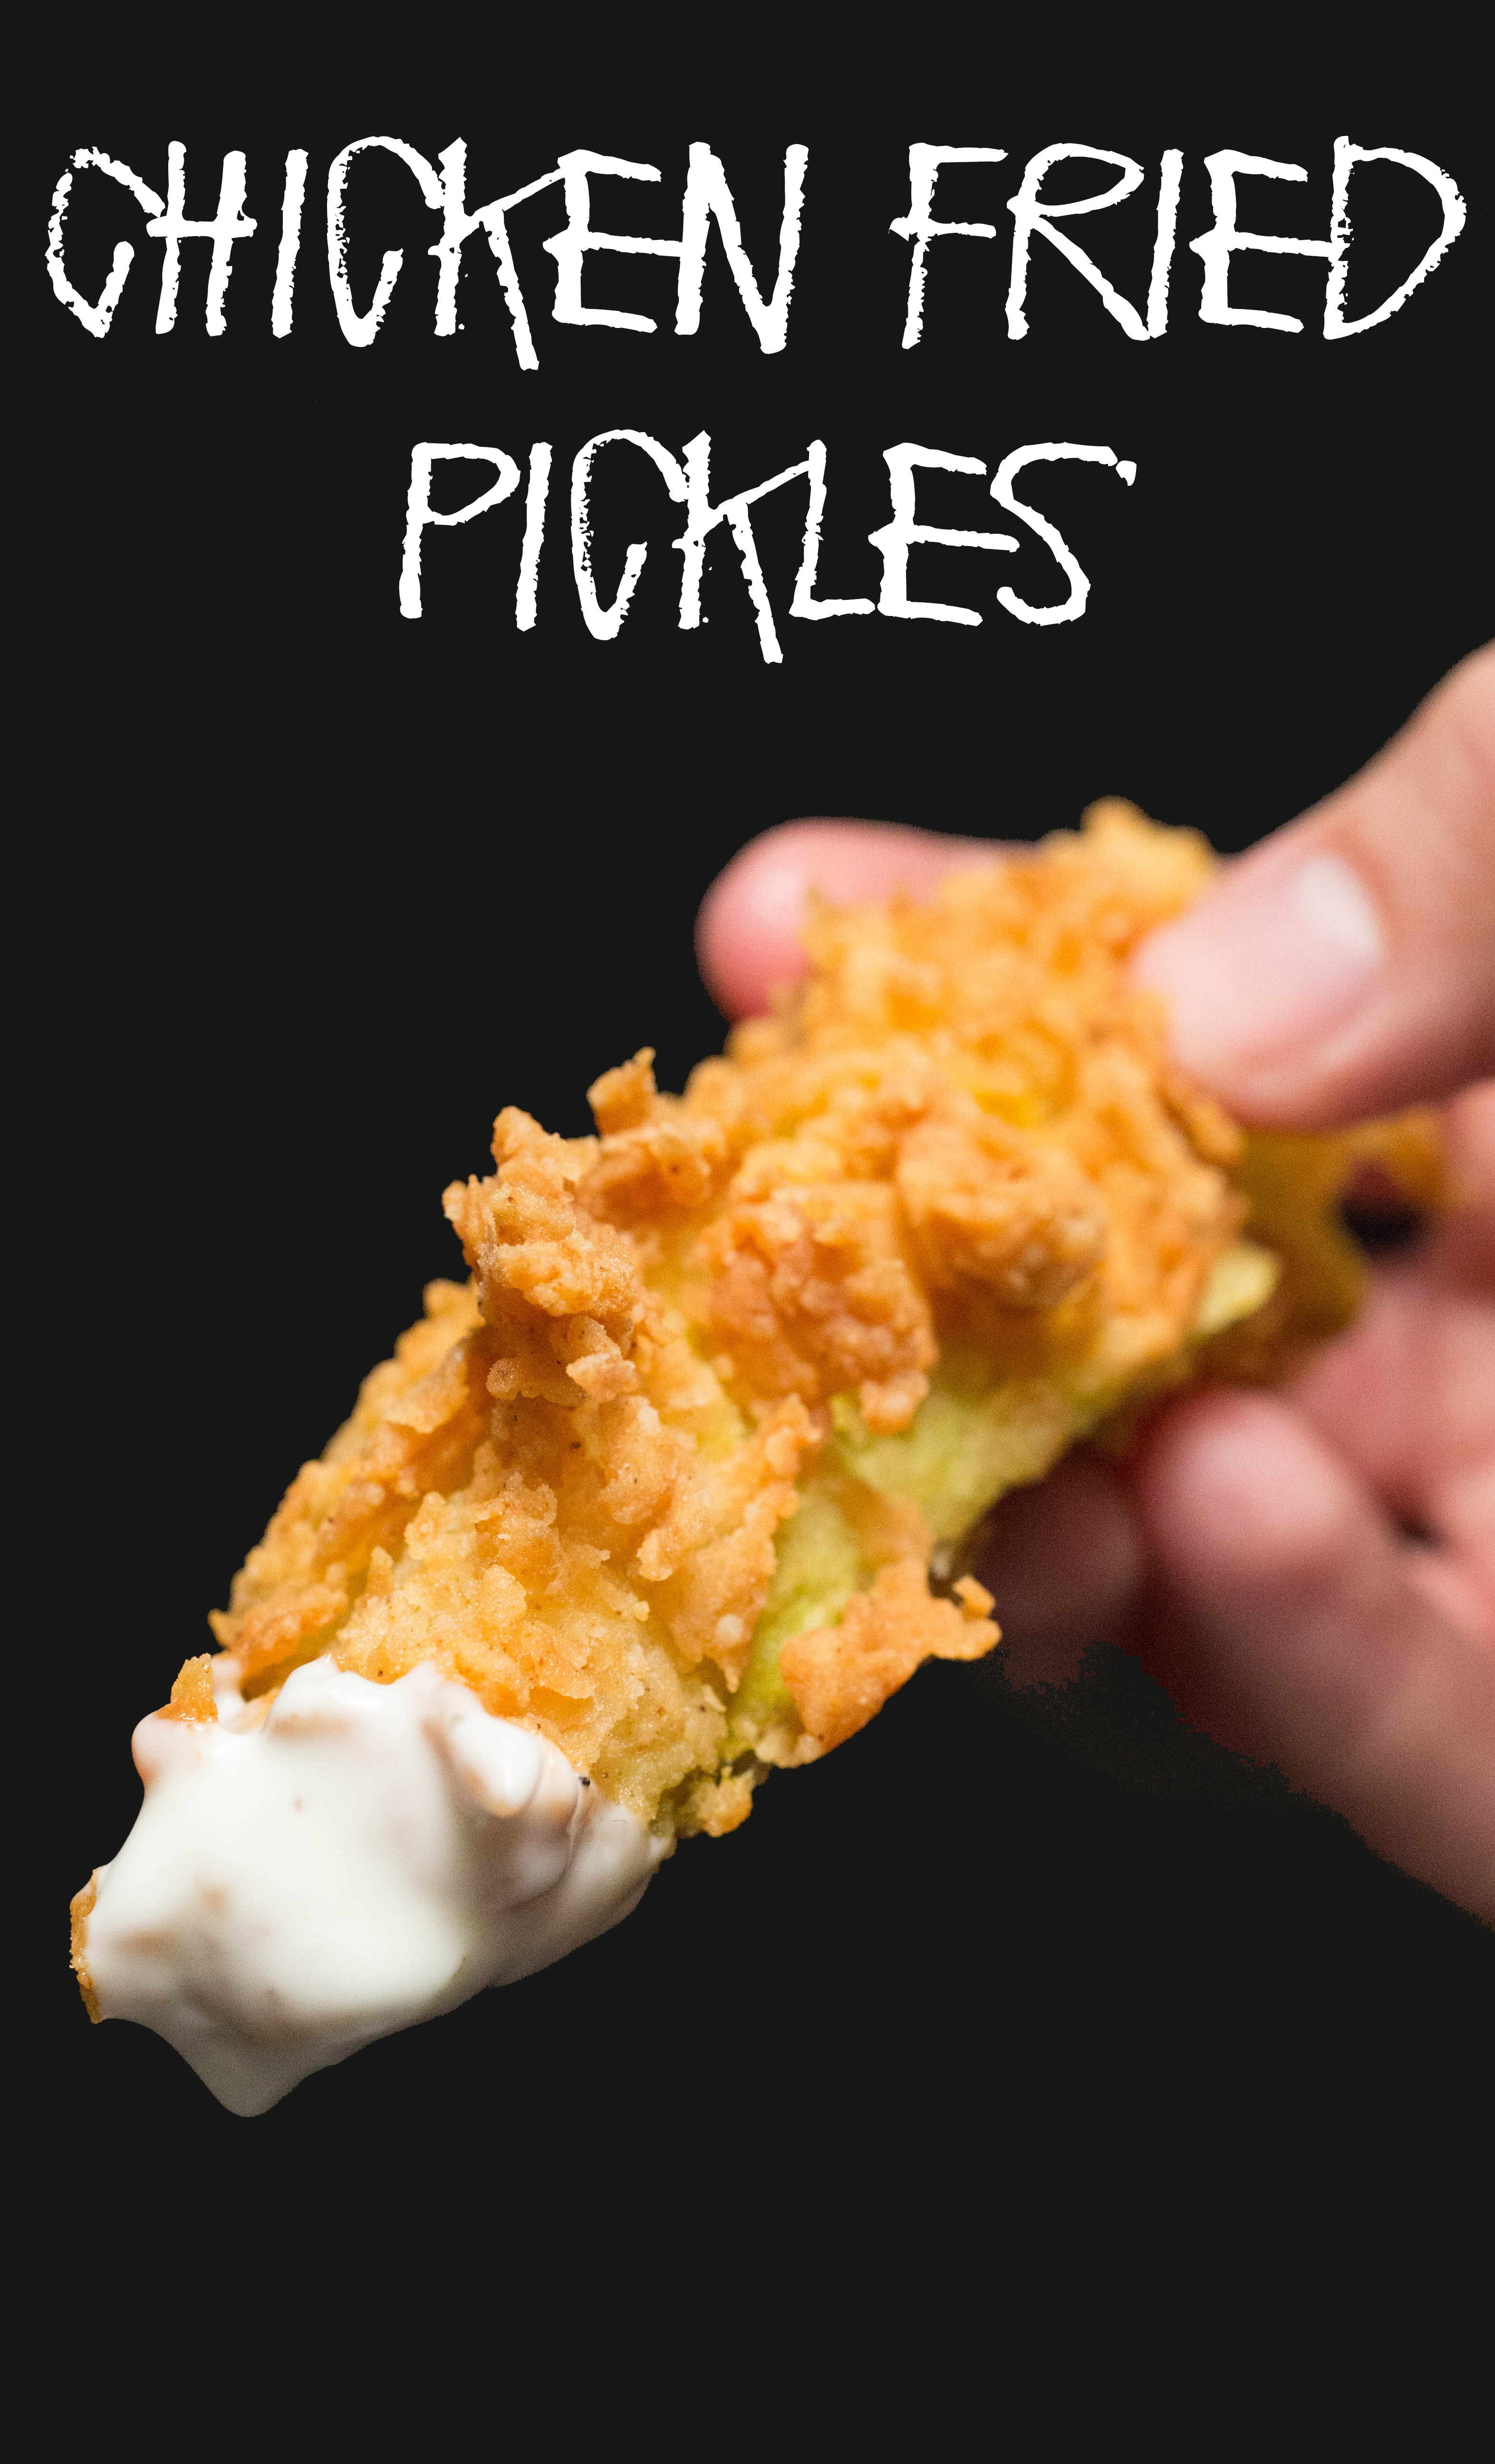 Close up of hand holding up a fried pickle that's been dipped in ranch. Text at the top reads "chicken fried pickles".